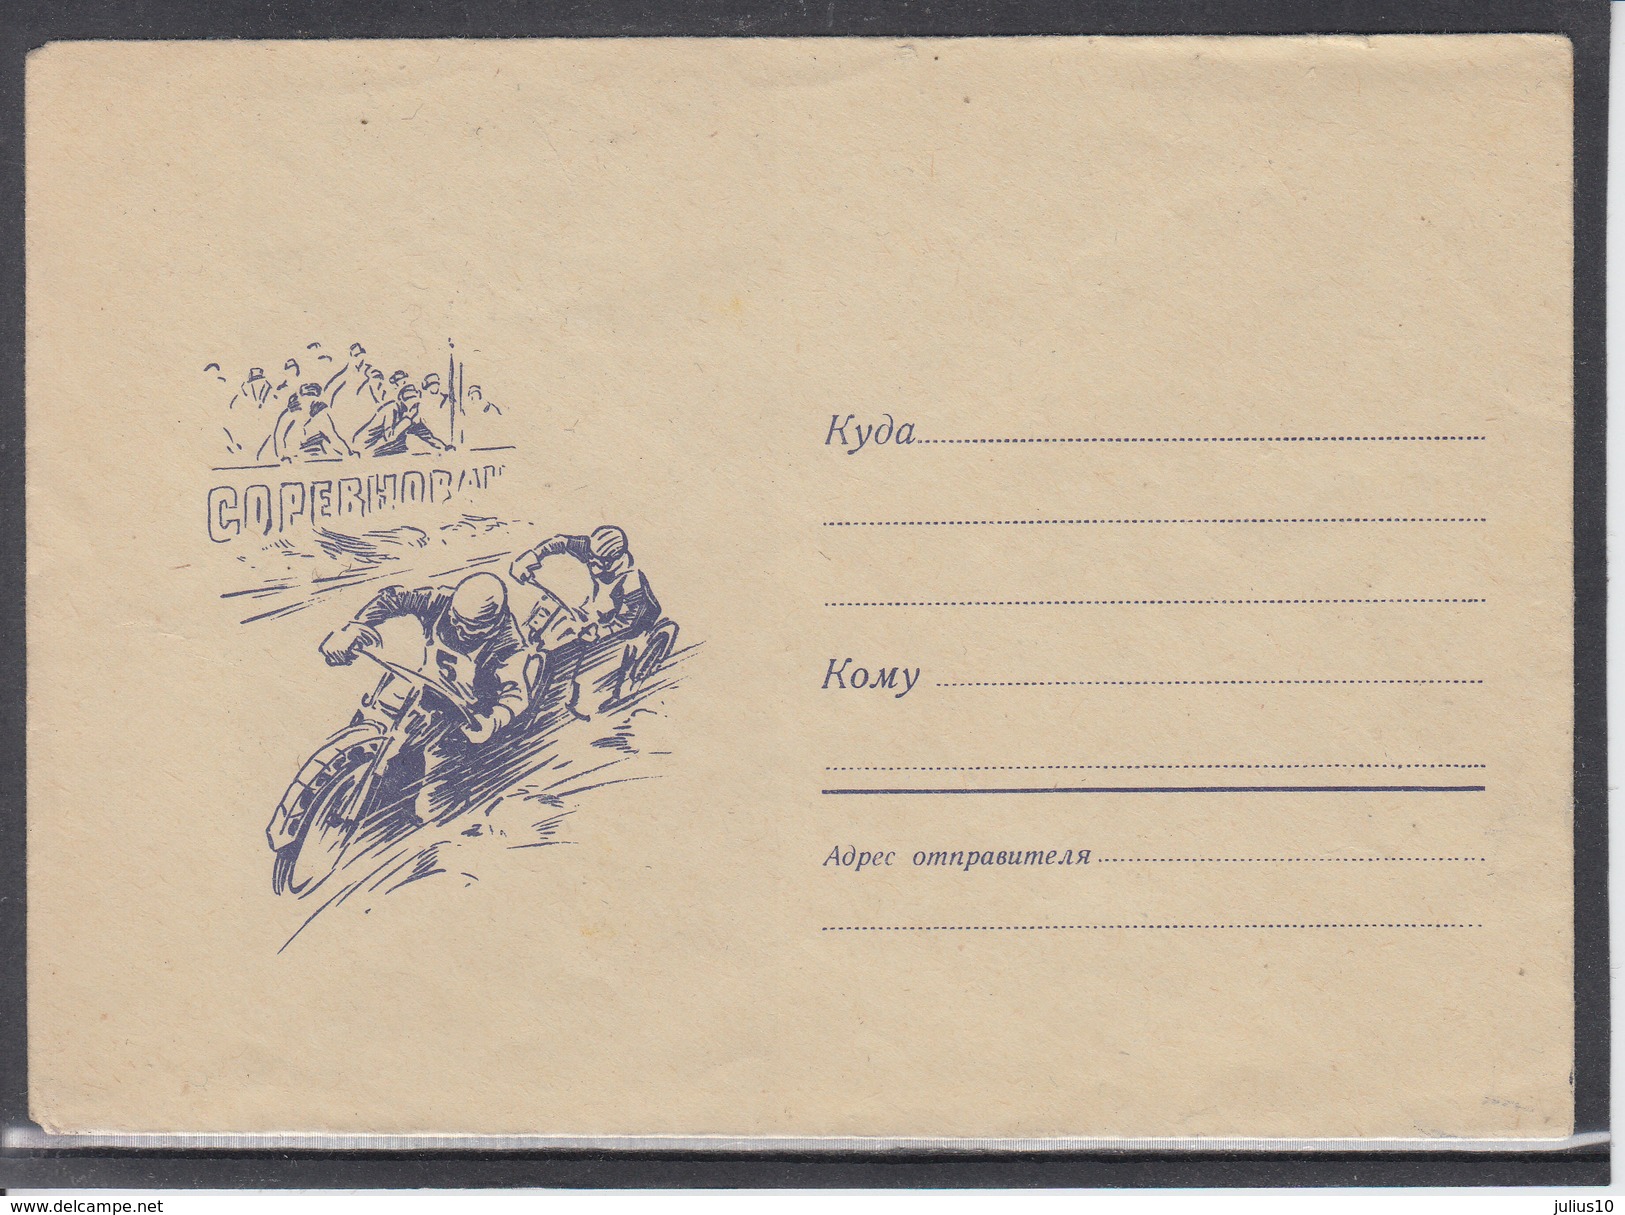 Sport Motorcycle On Russia USSR 1969 Mint Stationery Cover #15383 - Motorbikes